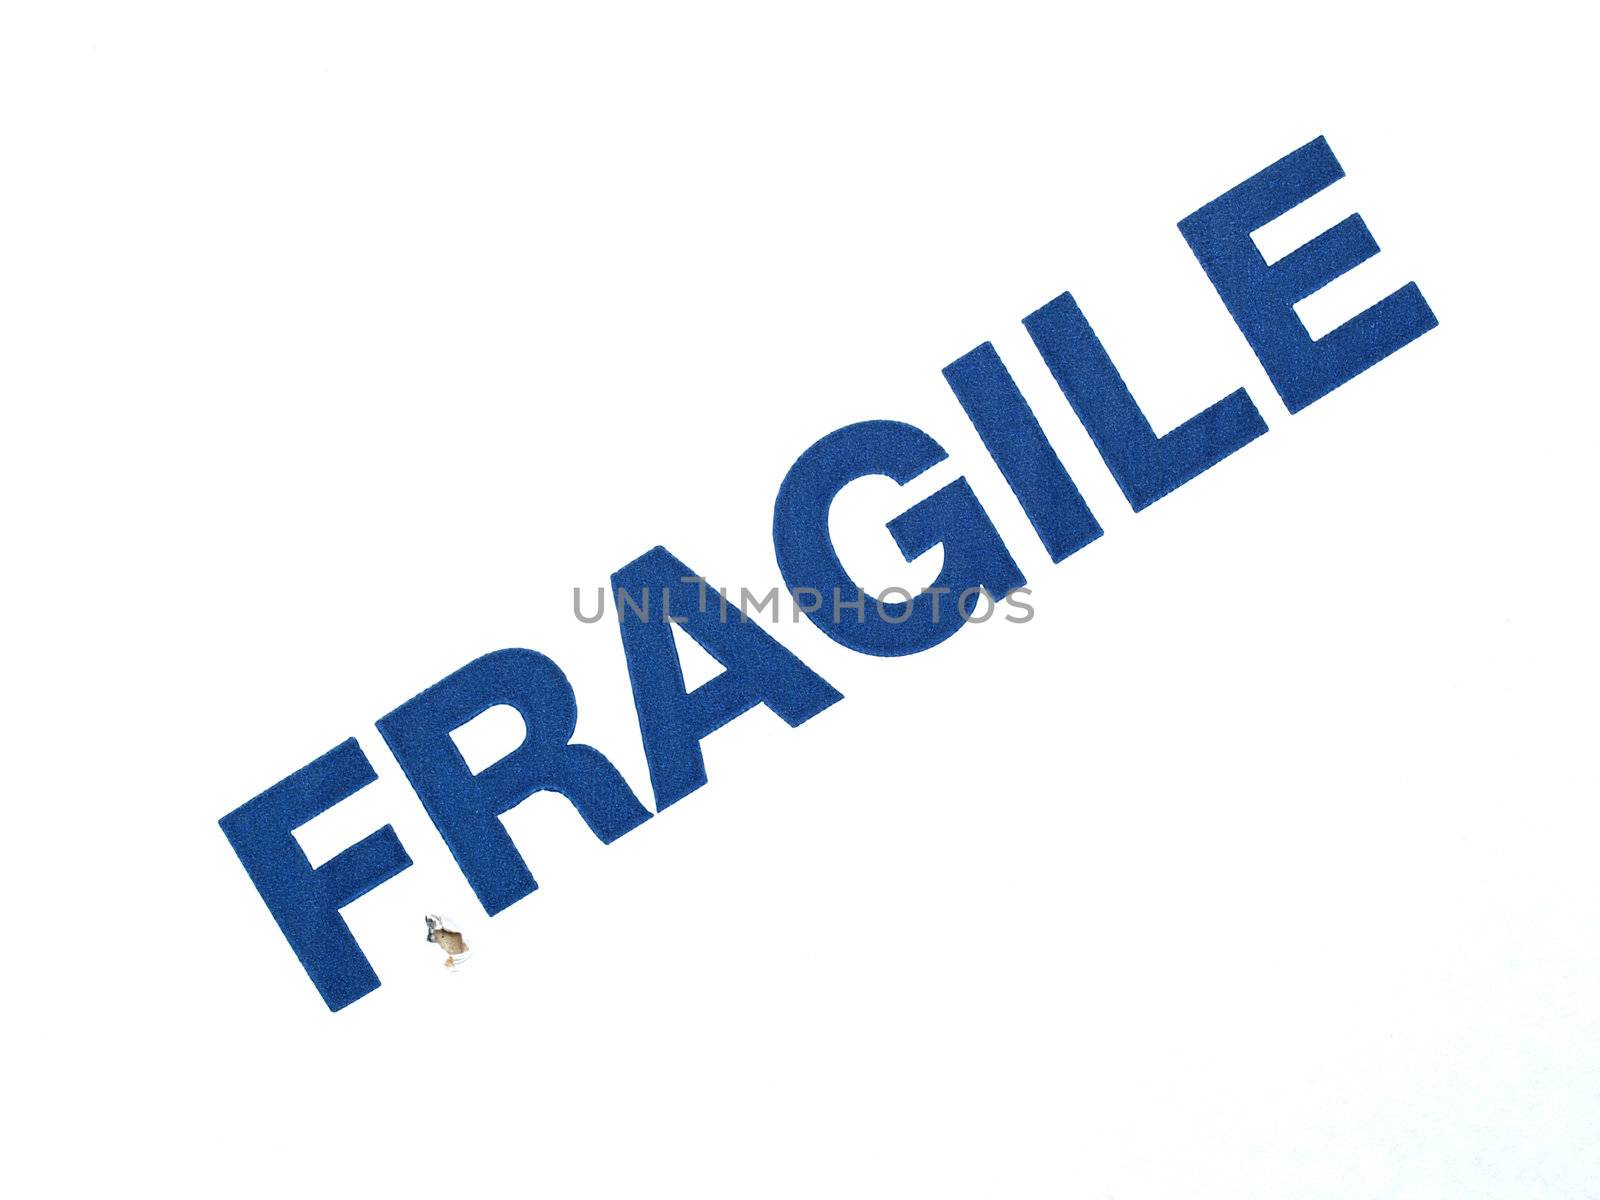 Fragile by paolo77